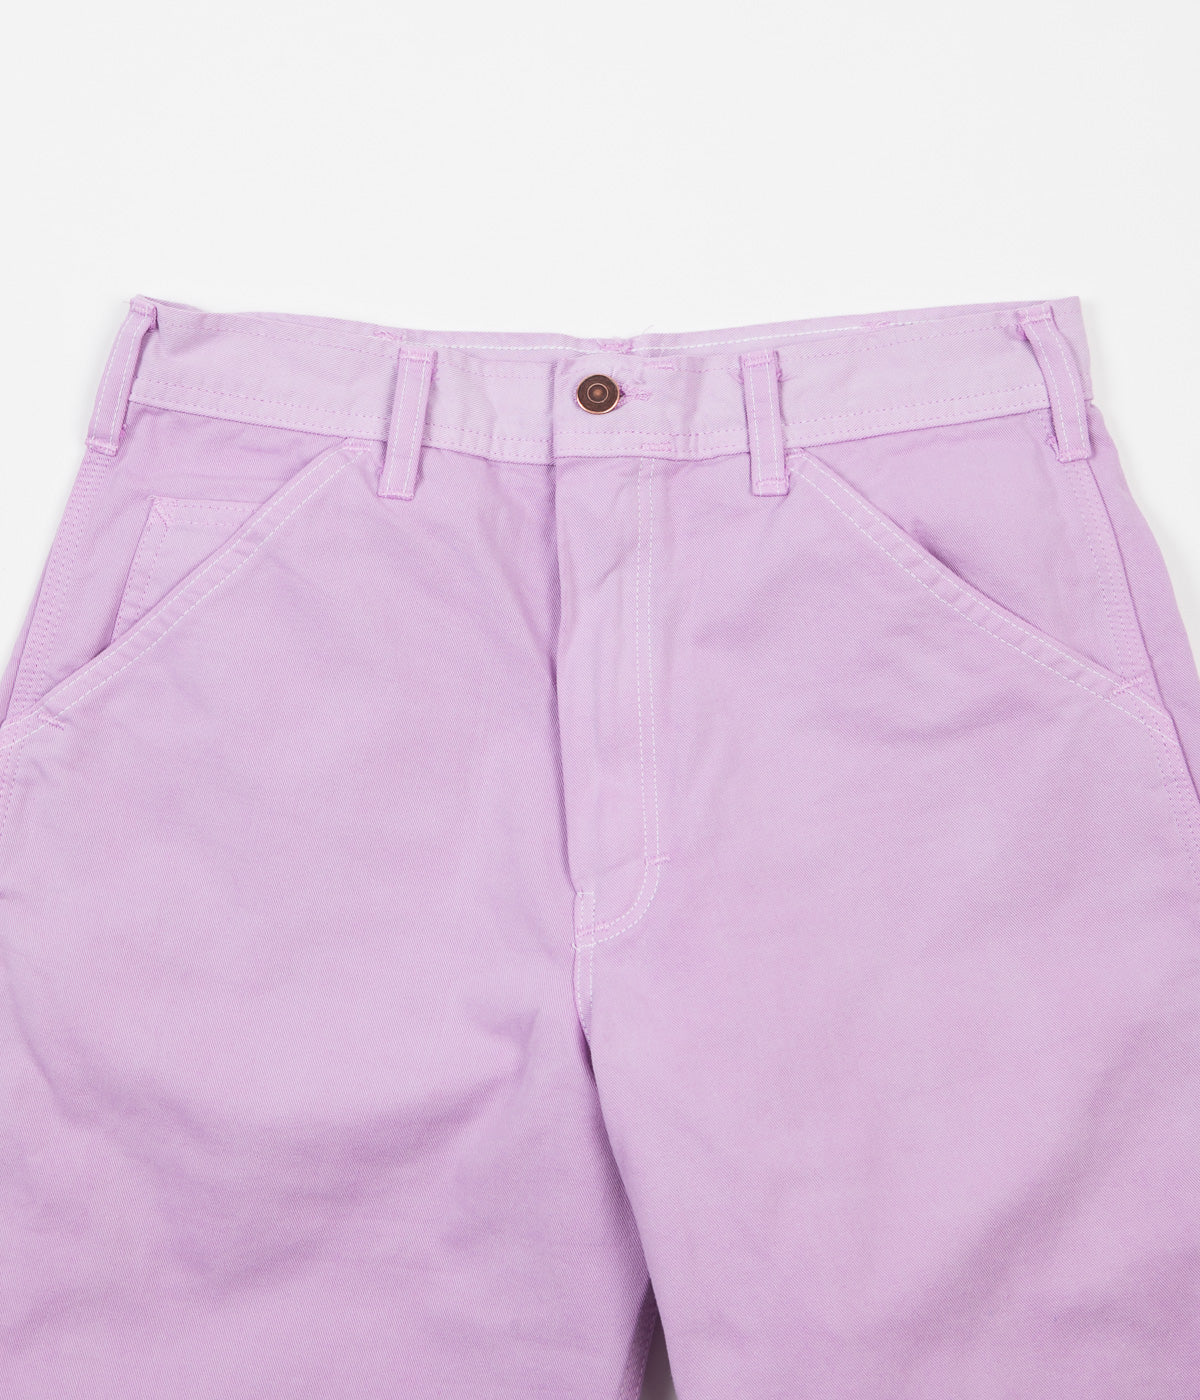 Stan Ray Single Knee Painter Pant Trousers - Faded Magenta Overdye ...